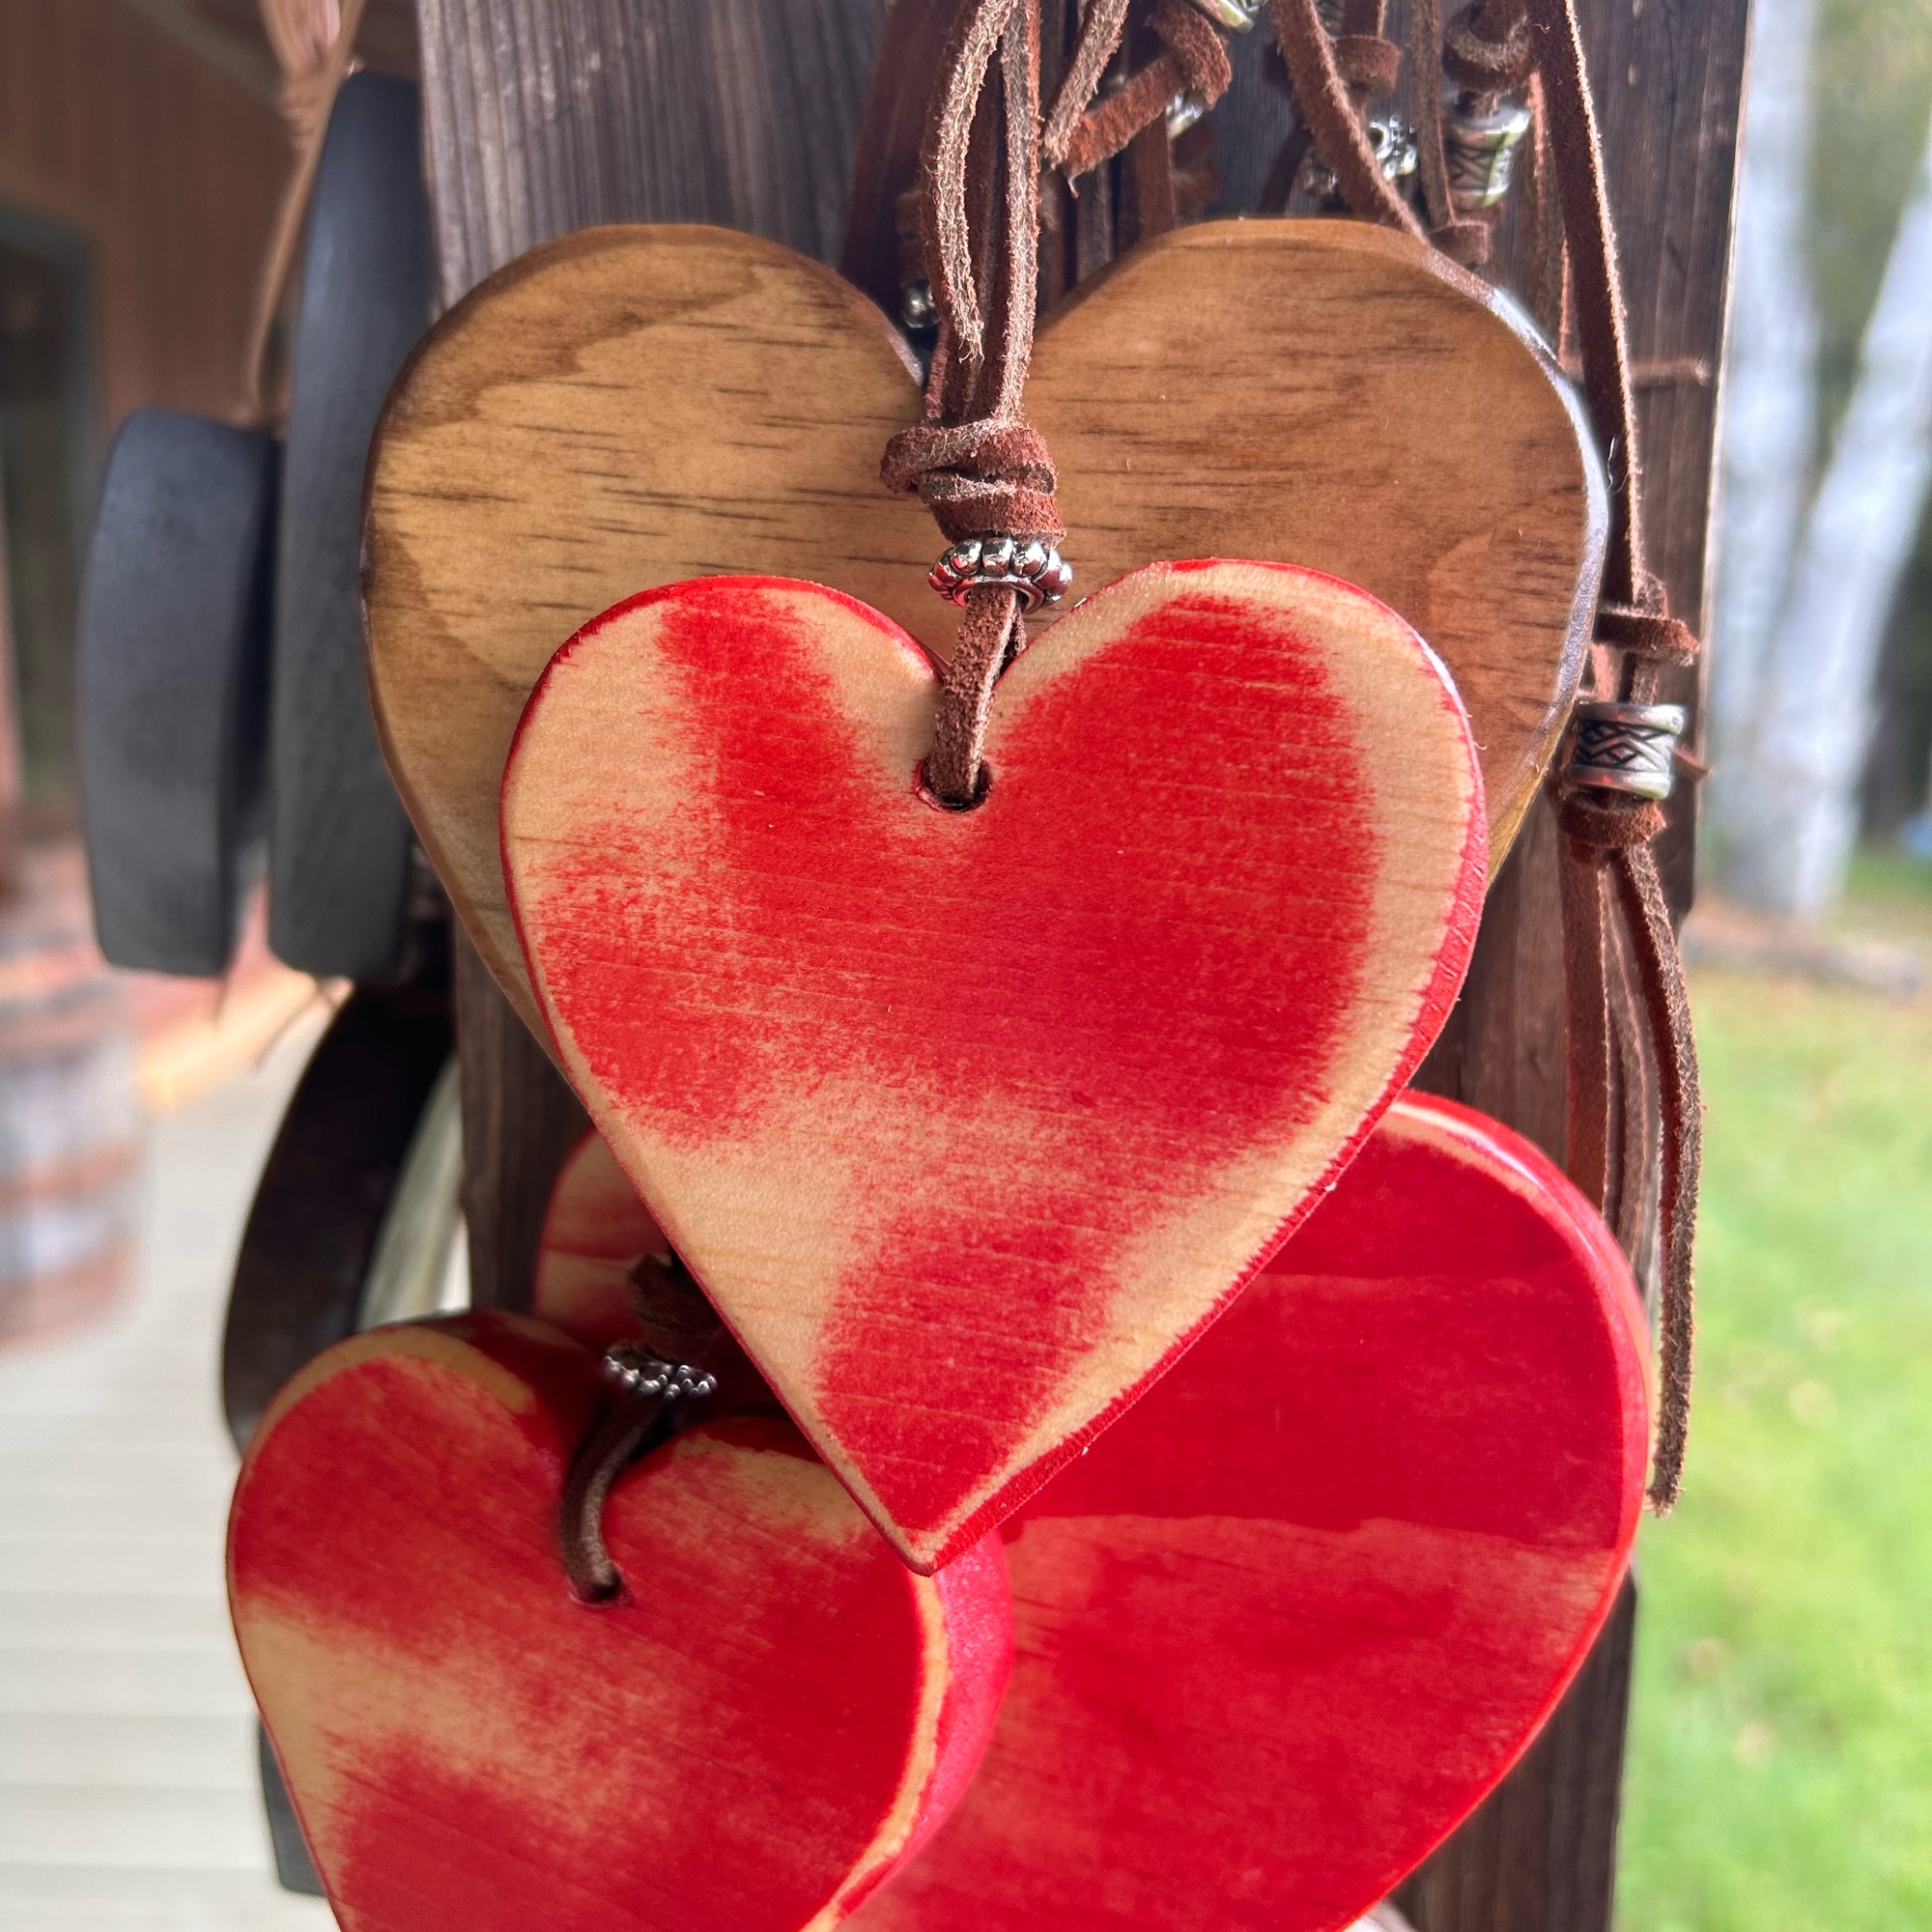 Wood Hearts. Decorative Heart Shaped Wall Hangings. Heart Decor. Red and  Wood Tones